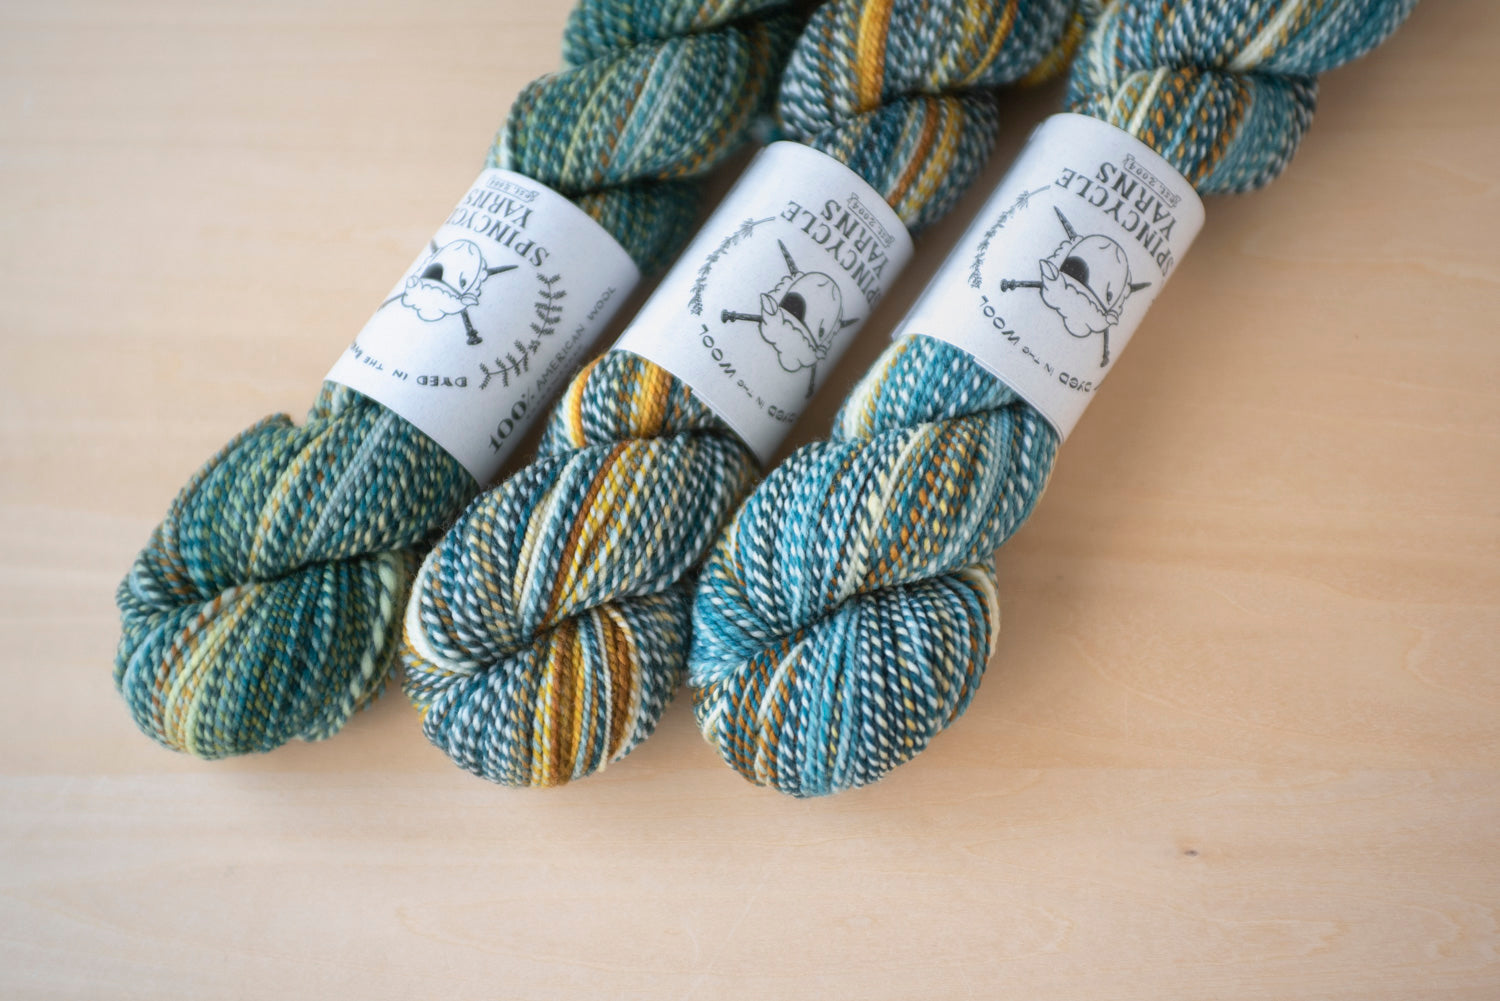 Spincycle Yarns Dyed in the Wool - amirisu online store